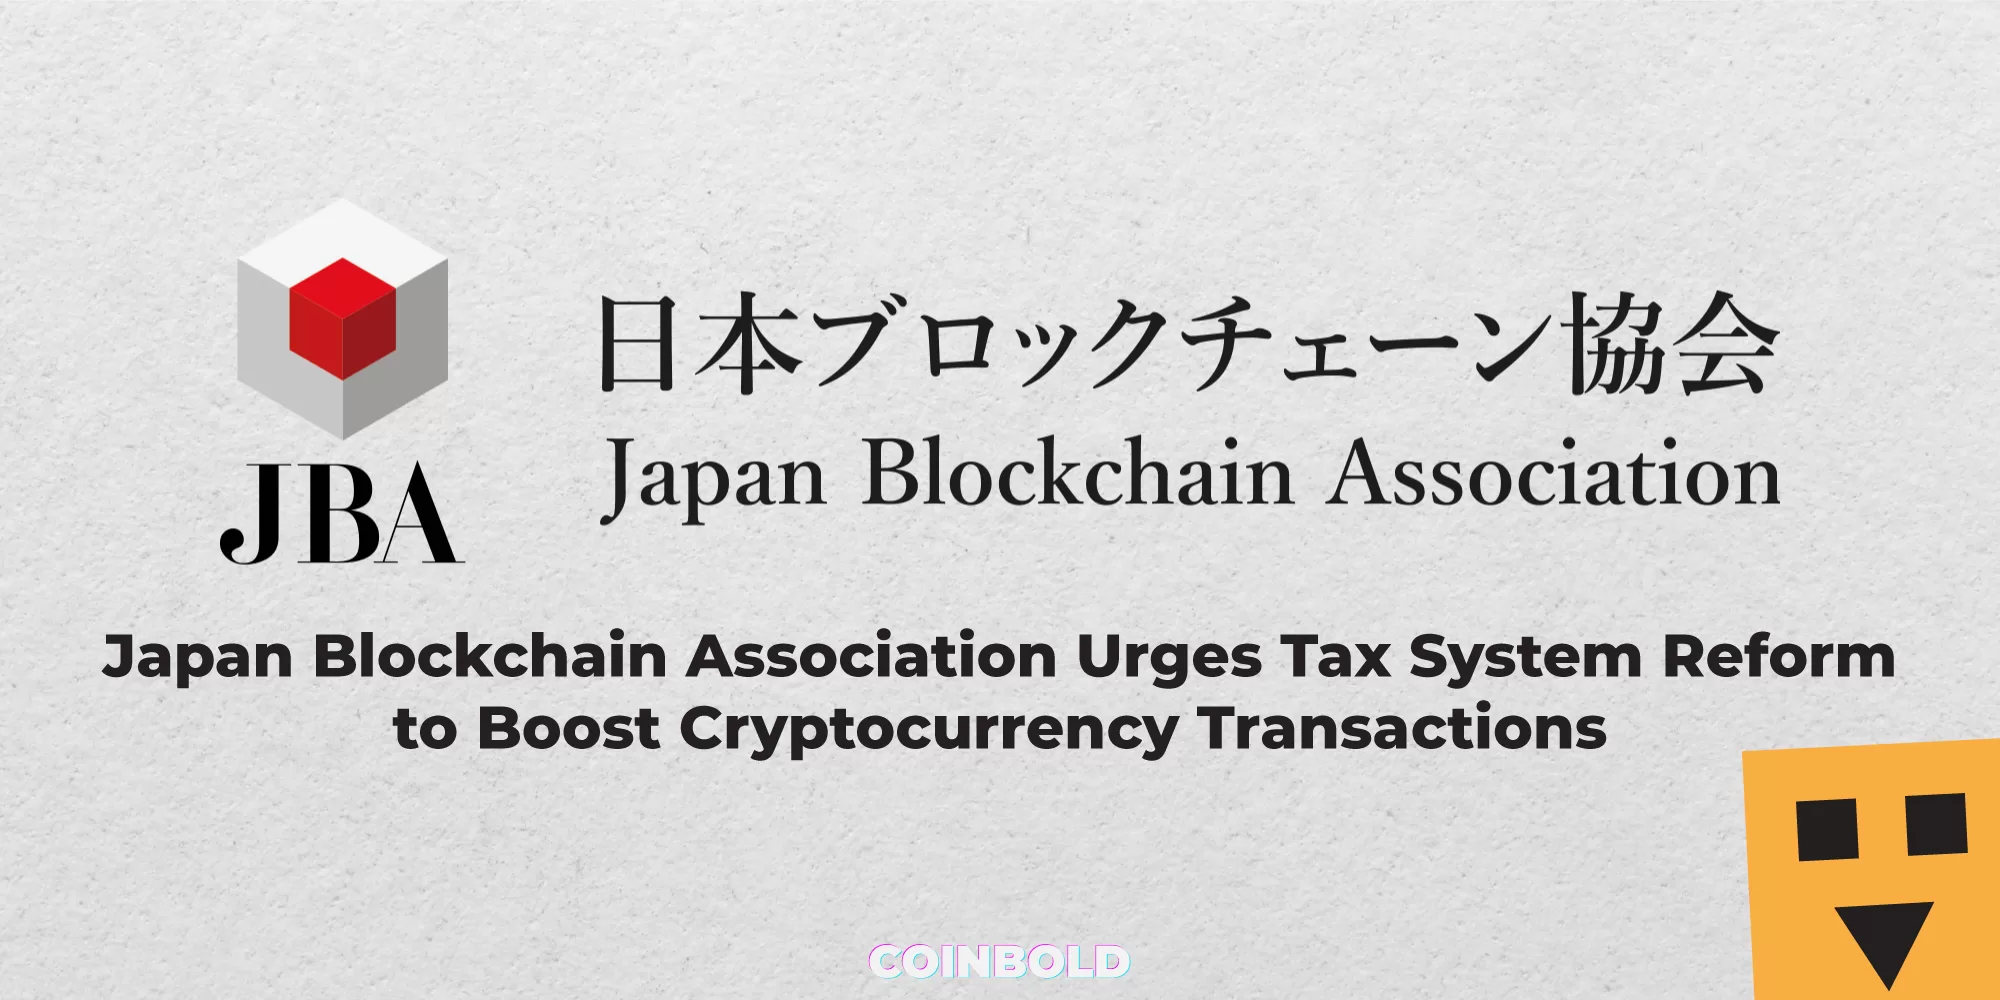 Japan Blockchain Association Urges Tax System Reform to Boost Cryptocurrency Transactions